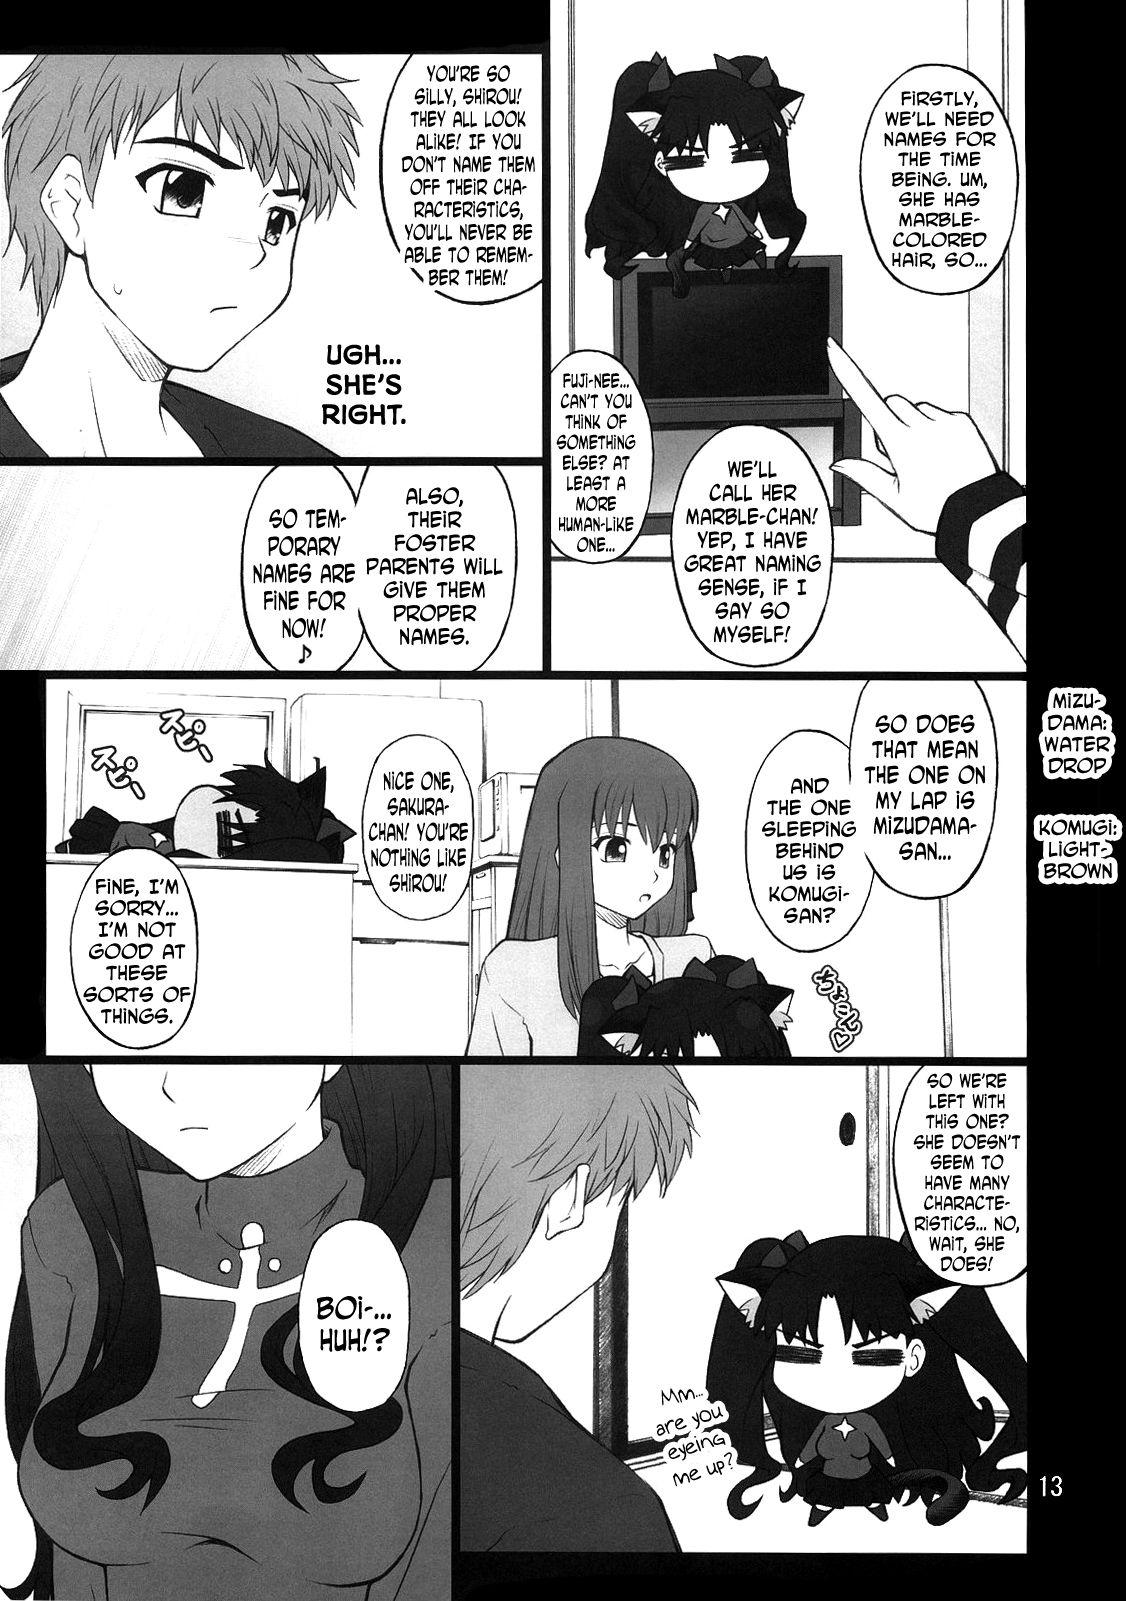 Strap On Grem-Rin 2 - Fate stay night Smalltits - Page 12